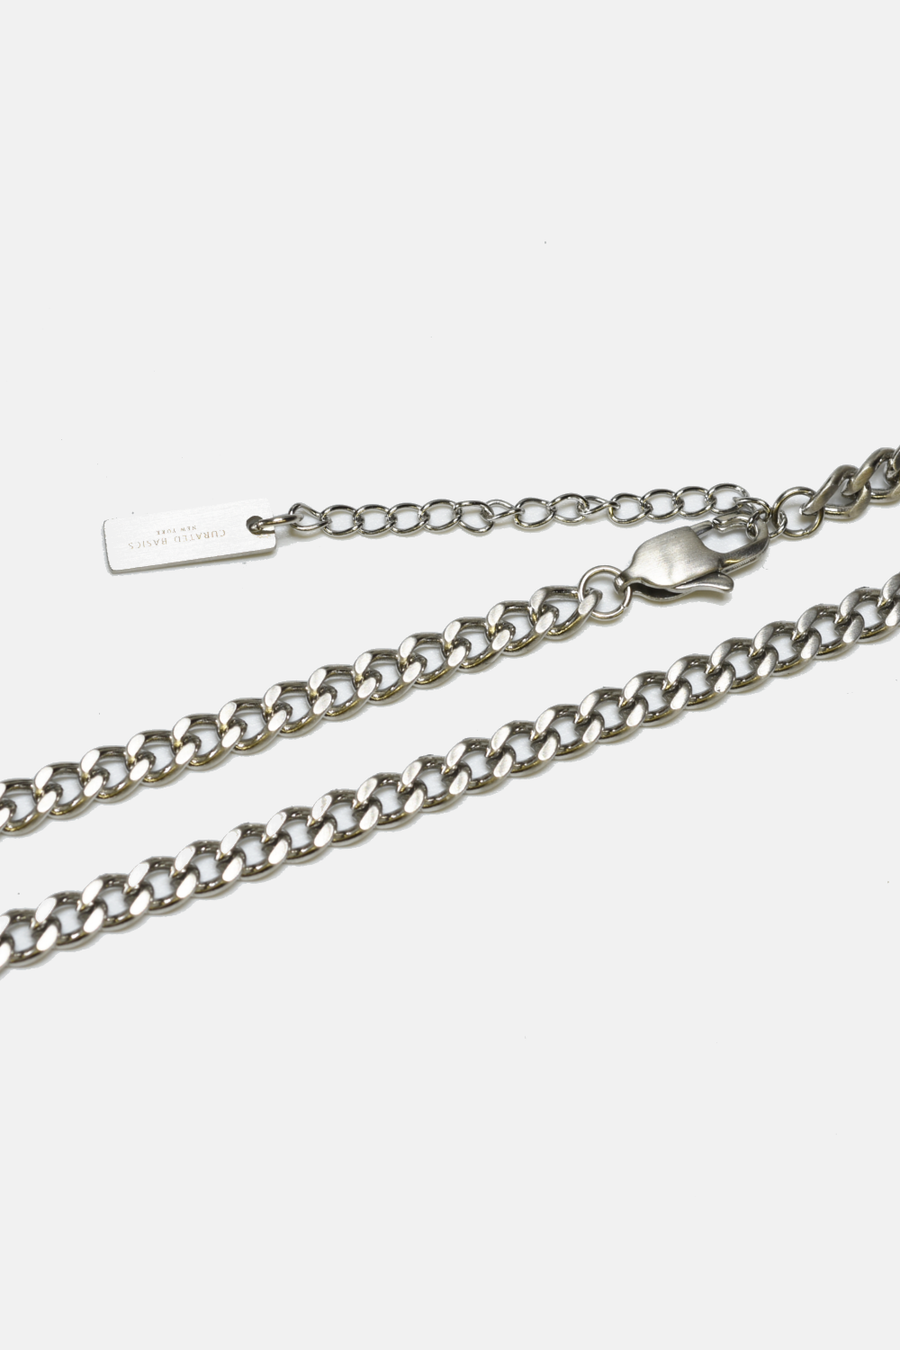 5mm Curb Chain Necklace: Stainless steel